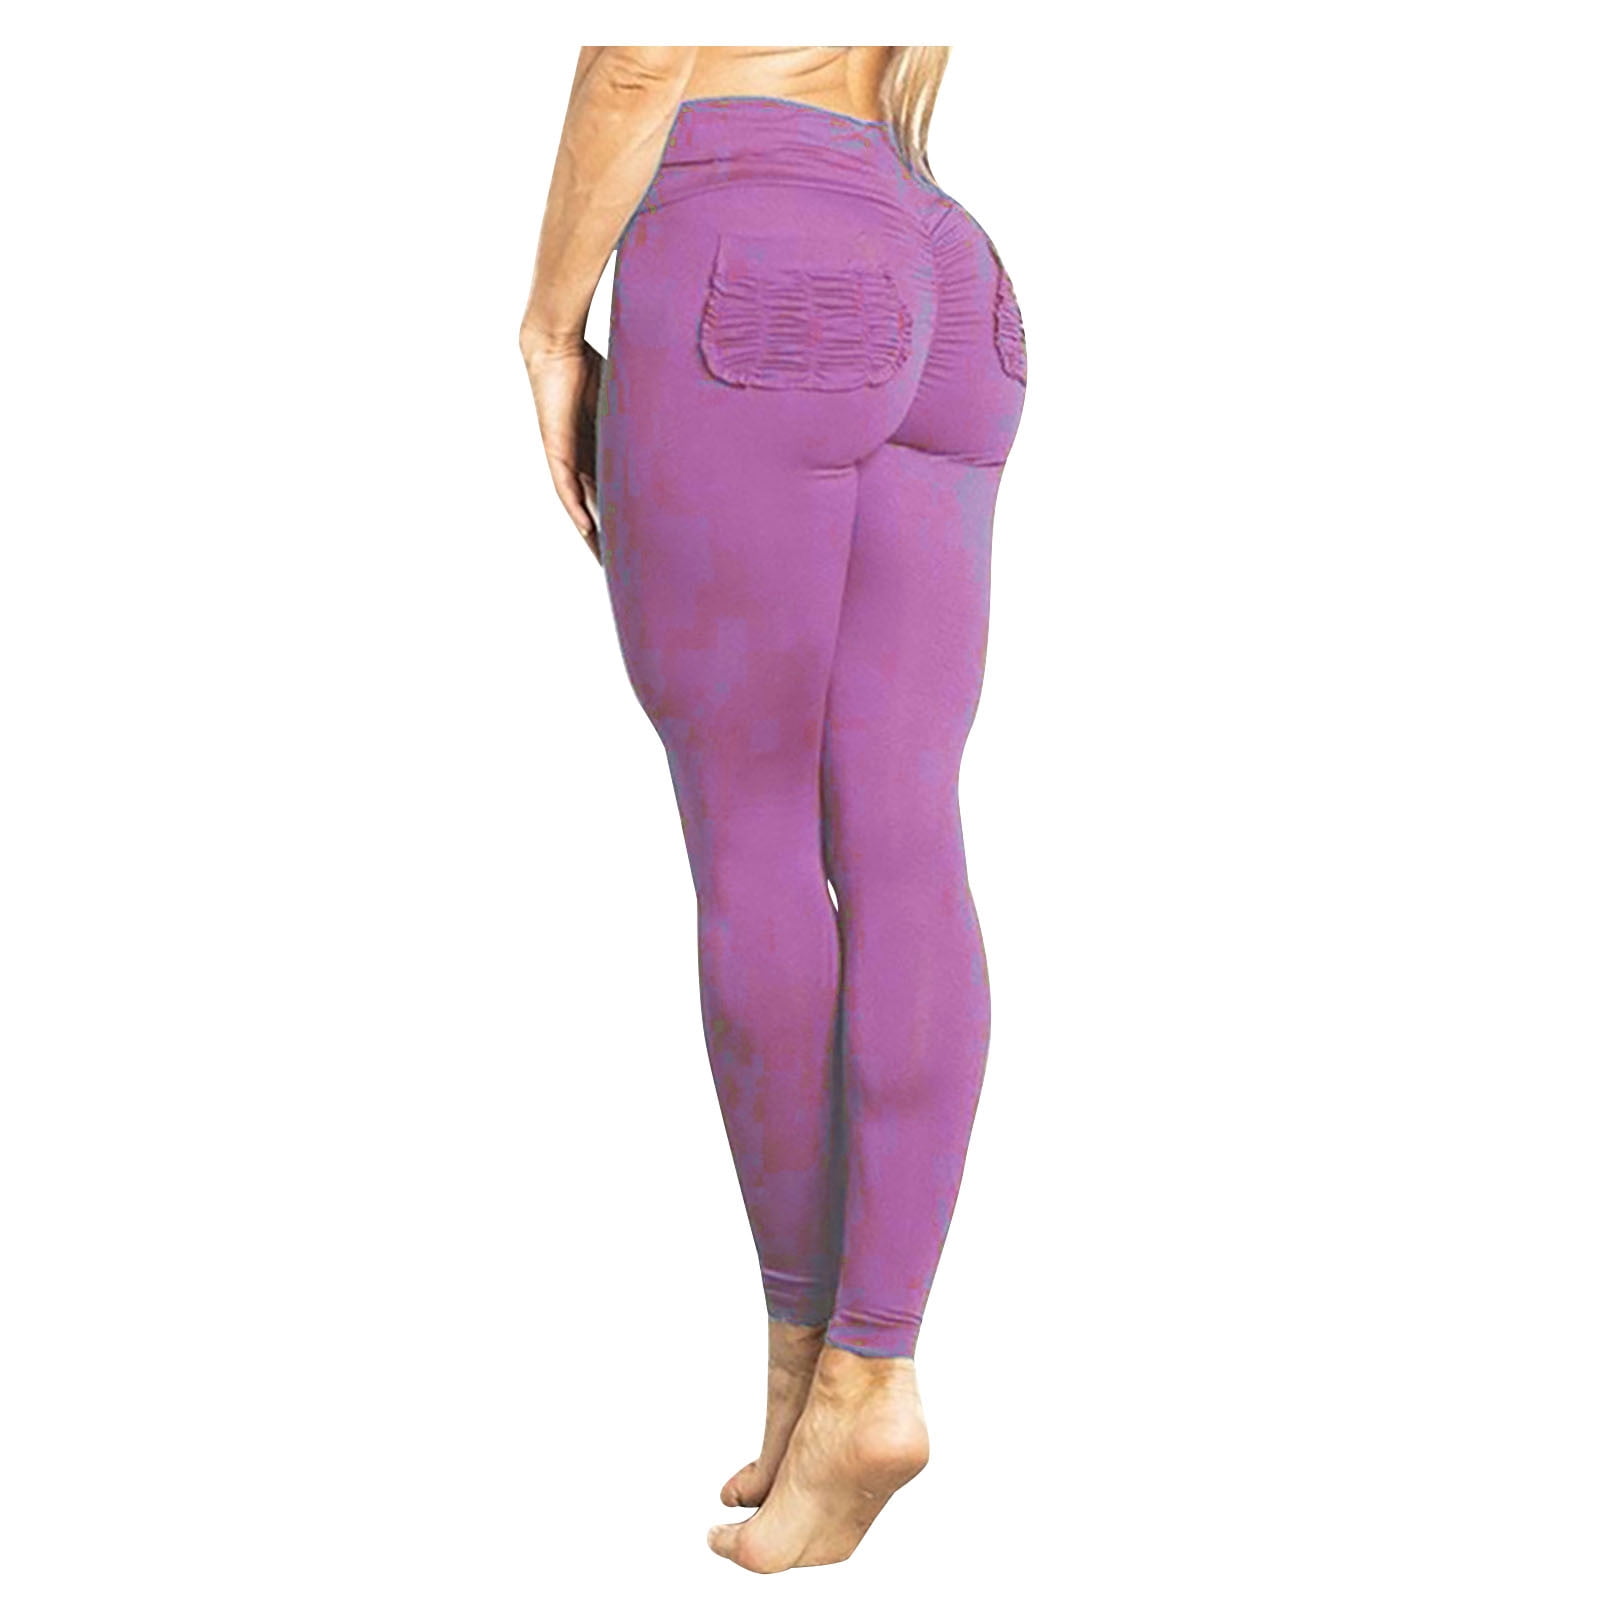 YWDJ Leggings for Women with Pockets Butt Lifting High Waist Yogalicious  Utility Dressy Everyday Soft Pocket Leggings Fitness Exercise Stretch High  Waist Skinny Suckled Pocket Yoga Pants Purple L 